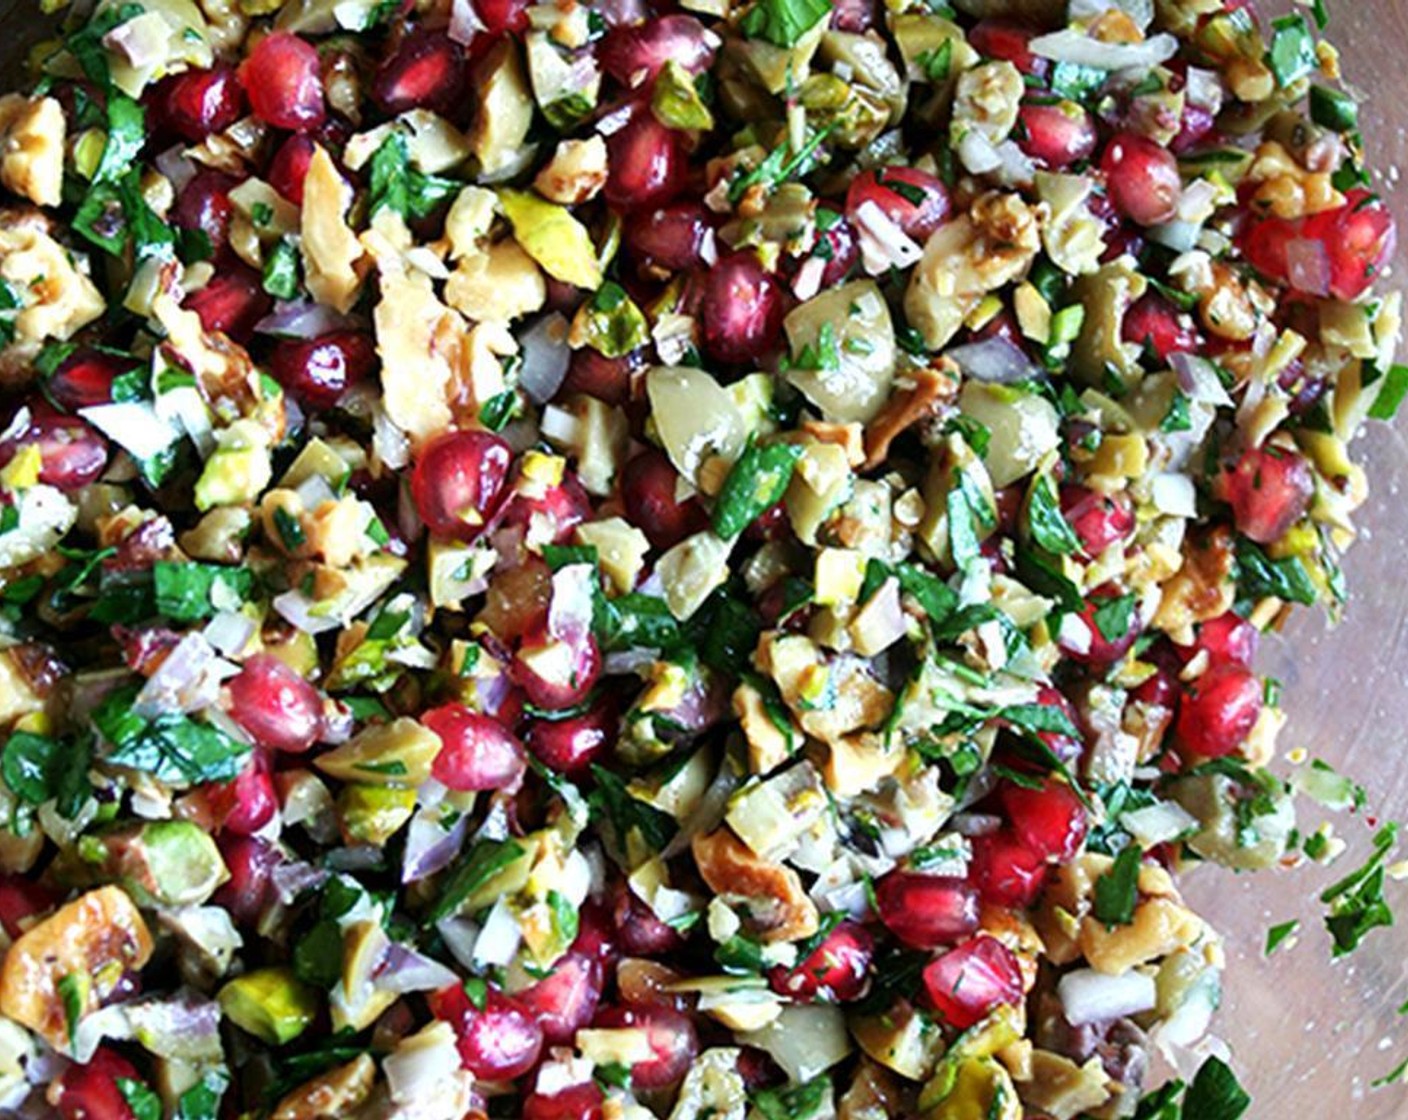 step 3 Combine Italian Flat-Leaf Parsley (1 Tbsp), Serrano Chili (1), Shallots (2), Shelled Unsalted Pistachios (1/4 cup), Green Olives (1/2 cup), {@10:}, walnuts, Pomegranate Seeds (1/2 cup), Extra-Virgin Olive Oil (1 Tbsp), Walnut Oil (1 Tbsp), Sea Salt (to taste), Ground Black Pepper (to taste) in a large bowl and toss gently.